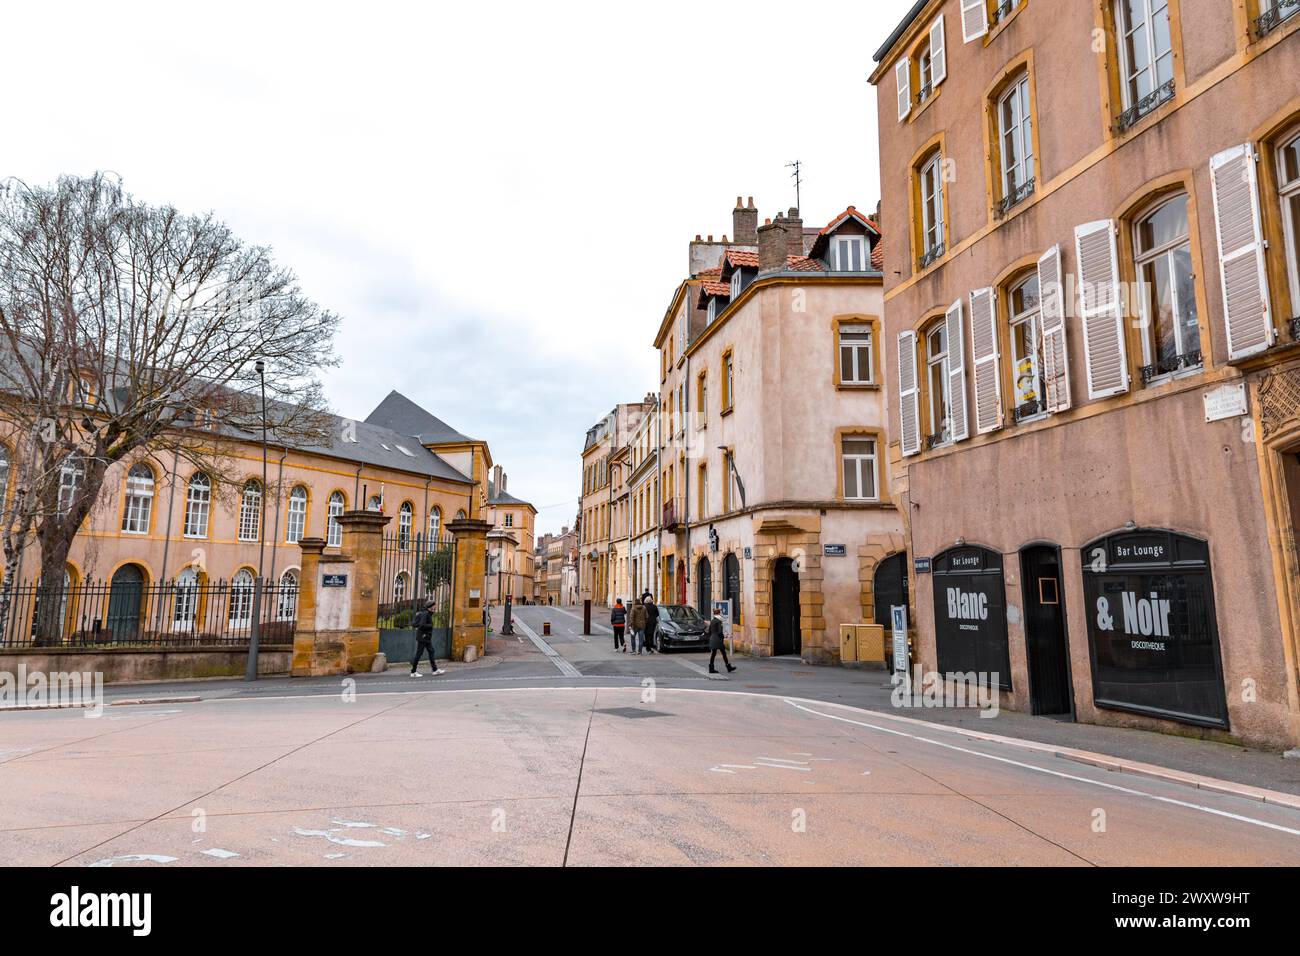 Metz, France - January 23, 2022: Street view and typical french buildings in the city of Metz, France. Stock Photo